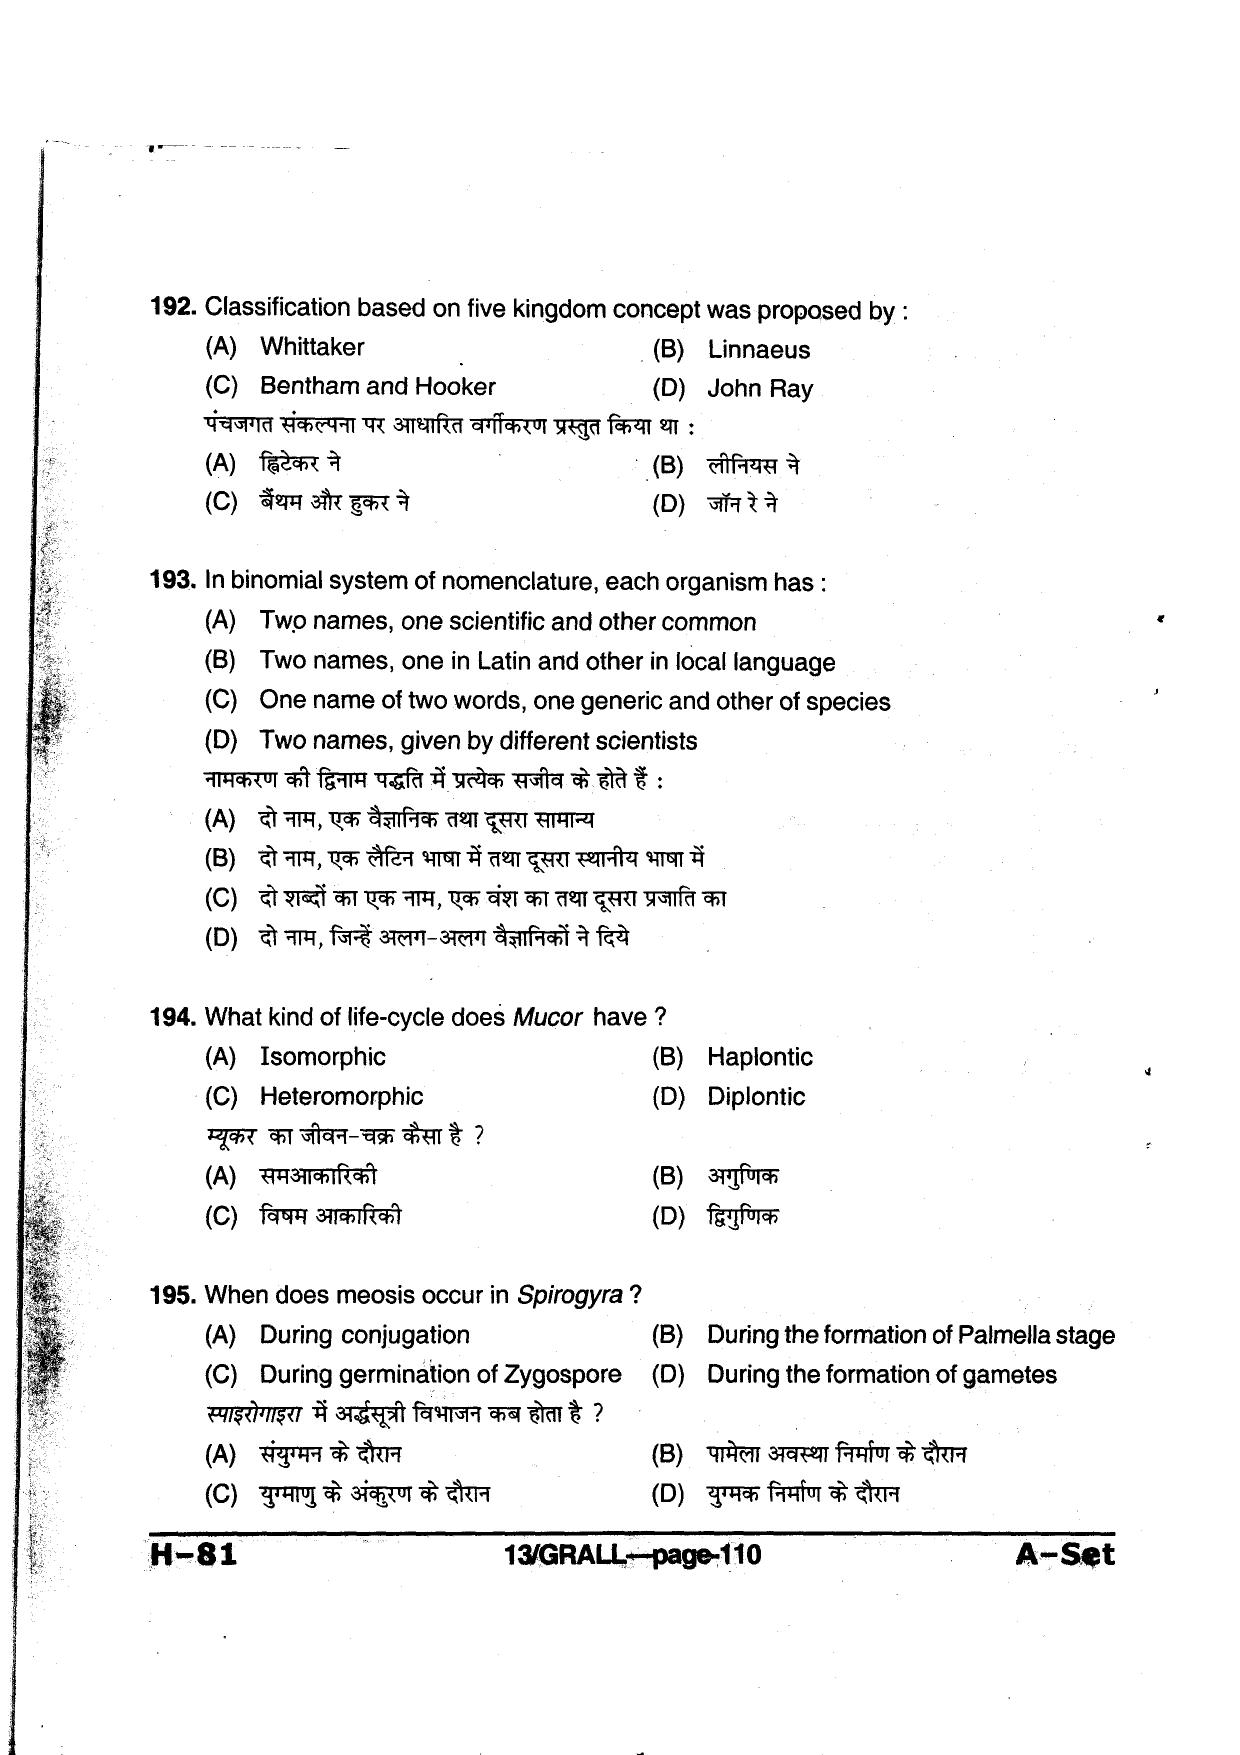 MP PAT 2013 Question Paper - Paper I - Page 110